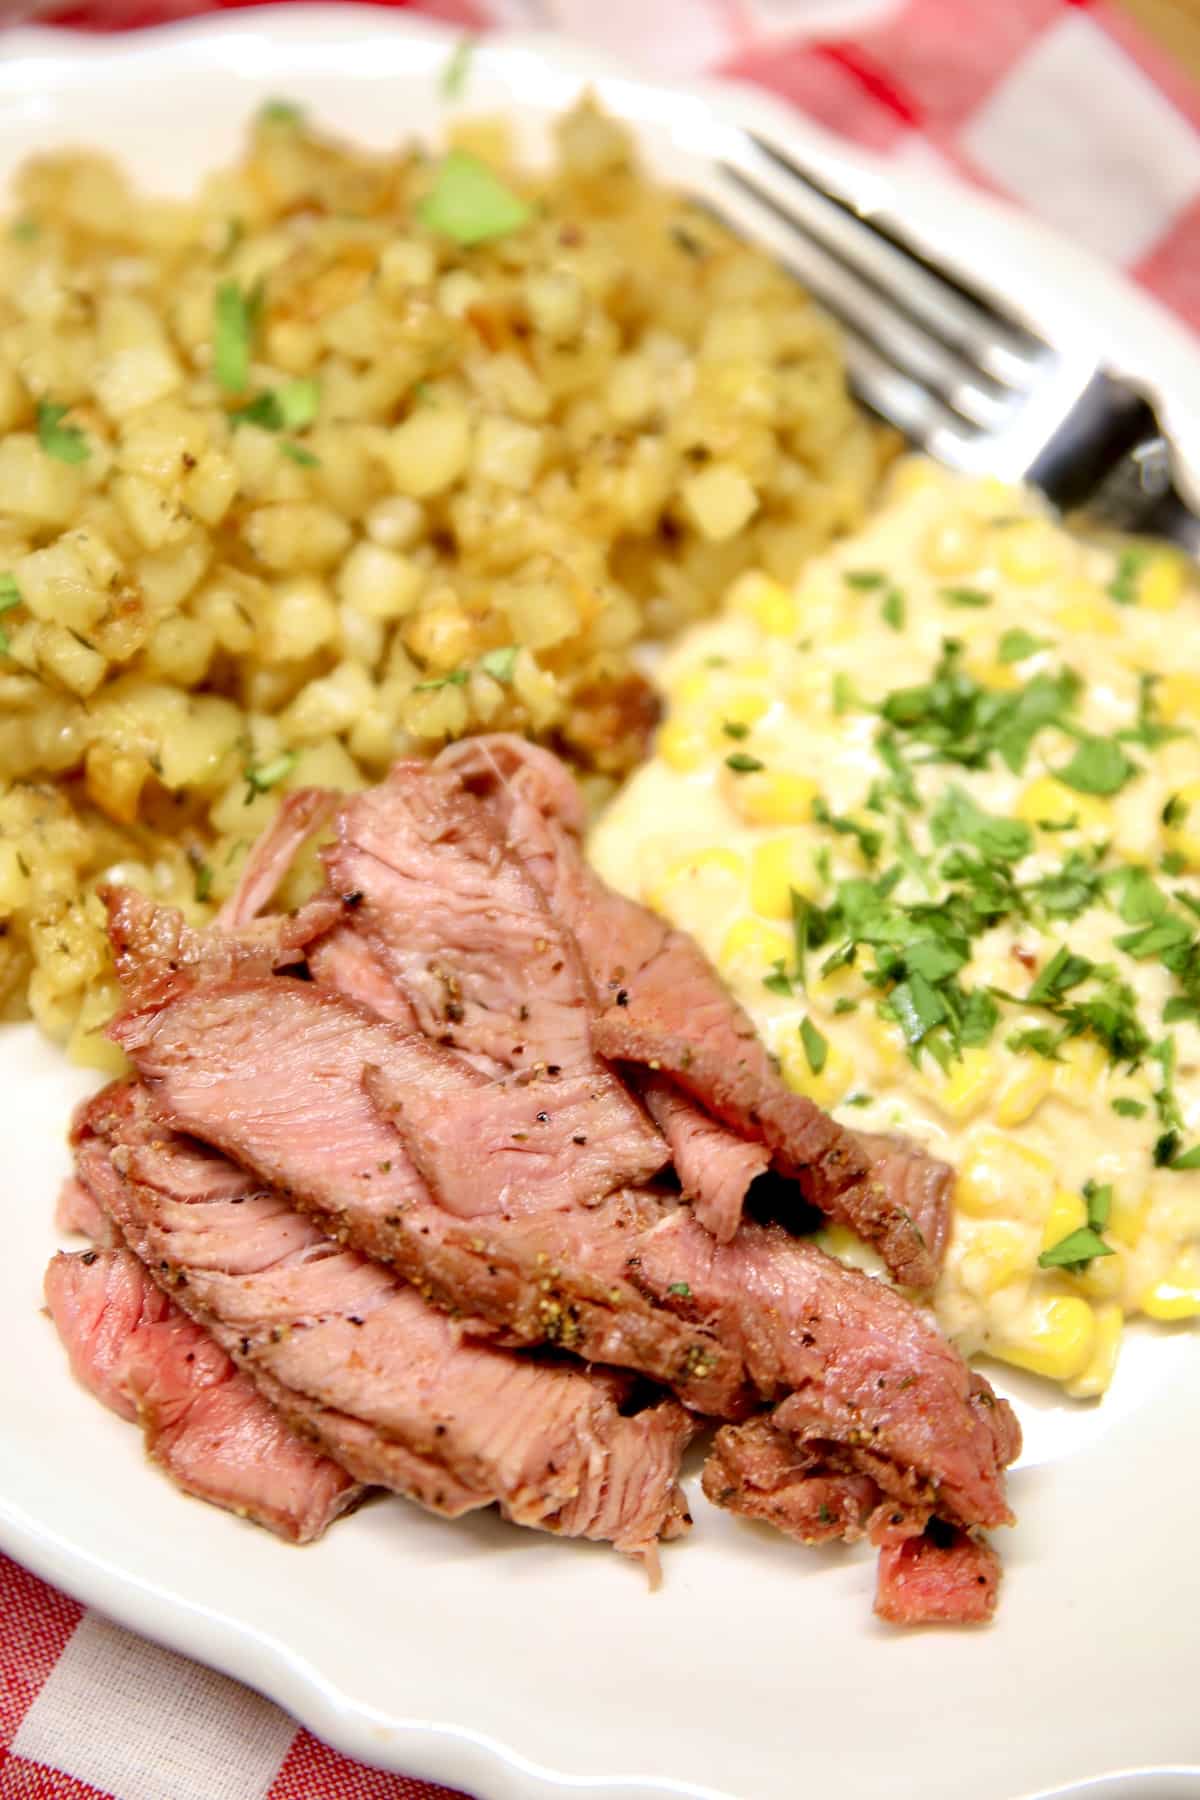 Sirloin steak sliced on a plate with potatoes and corn.